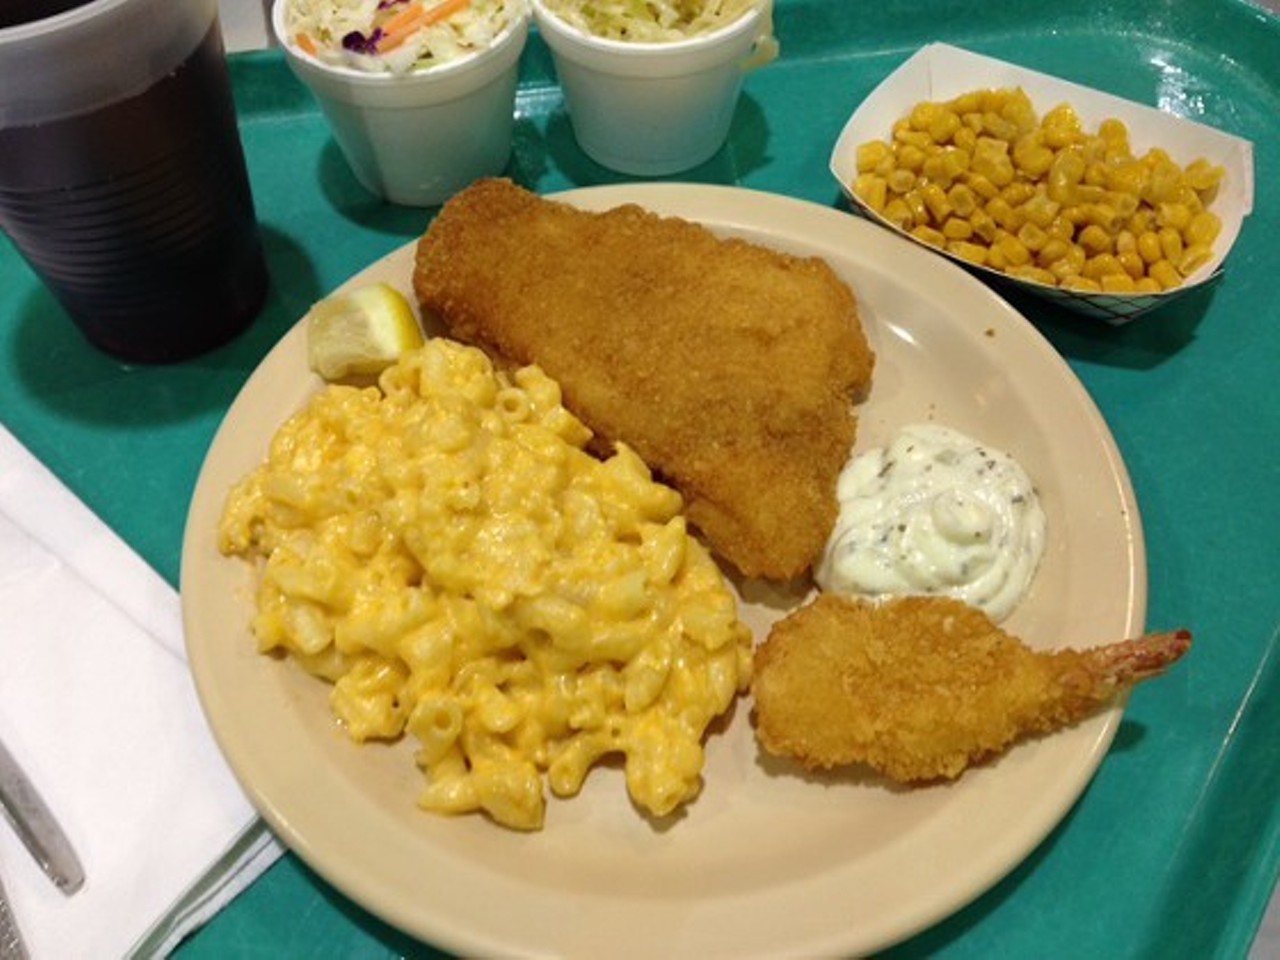 Epiphany of Our Lord
(6596 Smiley Avenue; 314-781-1199)
Epiphany of Our Lord has streamlined the fish-fry tradition with a thorough online ordering process. Patrons can choose from fried catfish, pollock, shrimp and cod, as well as a litany of sides sold in 8-ounce, half-pint, pint and quart servings. Orders are carryout only and must be made prior to noon the Thursday before. Customers must pay at the time of pickup with either cash or check. Dates and times of operation are every Friday from February 19 to March 26 from 4:30 p.m. to 7 p.m. &#151; Jack Killeen
Find out more here.
Photo credit: Cheryl Baehr